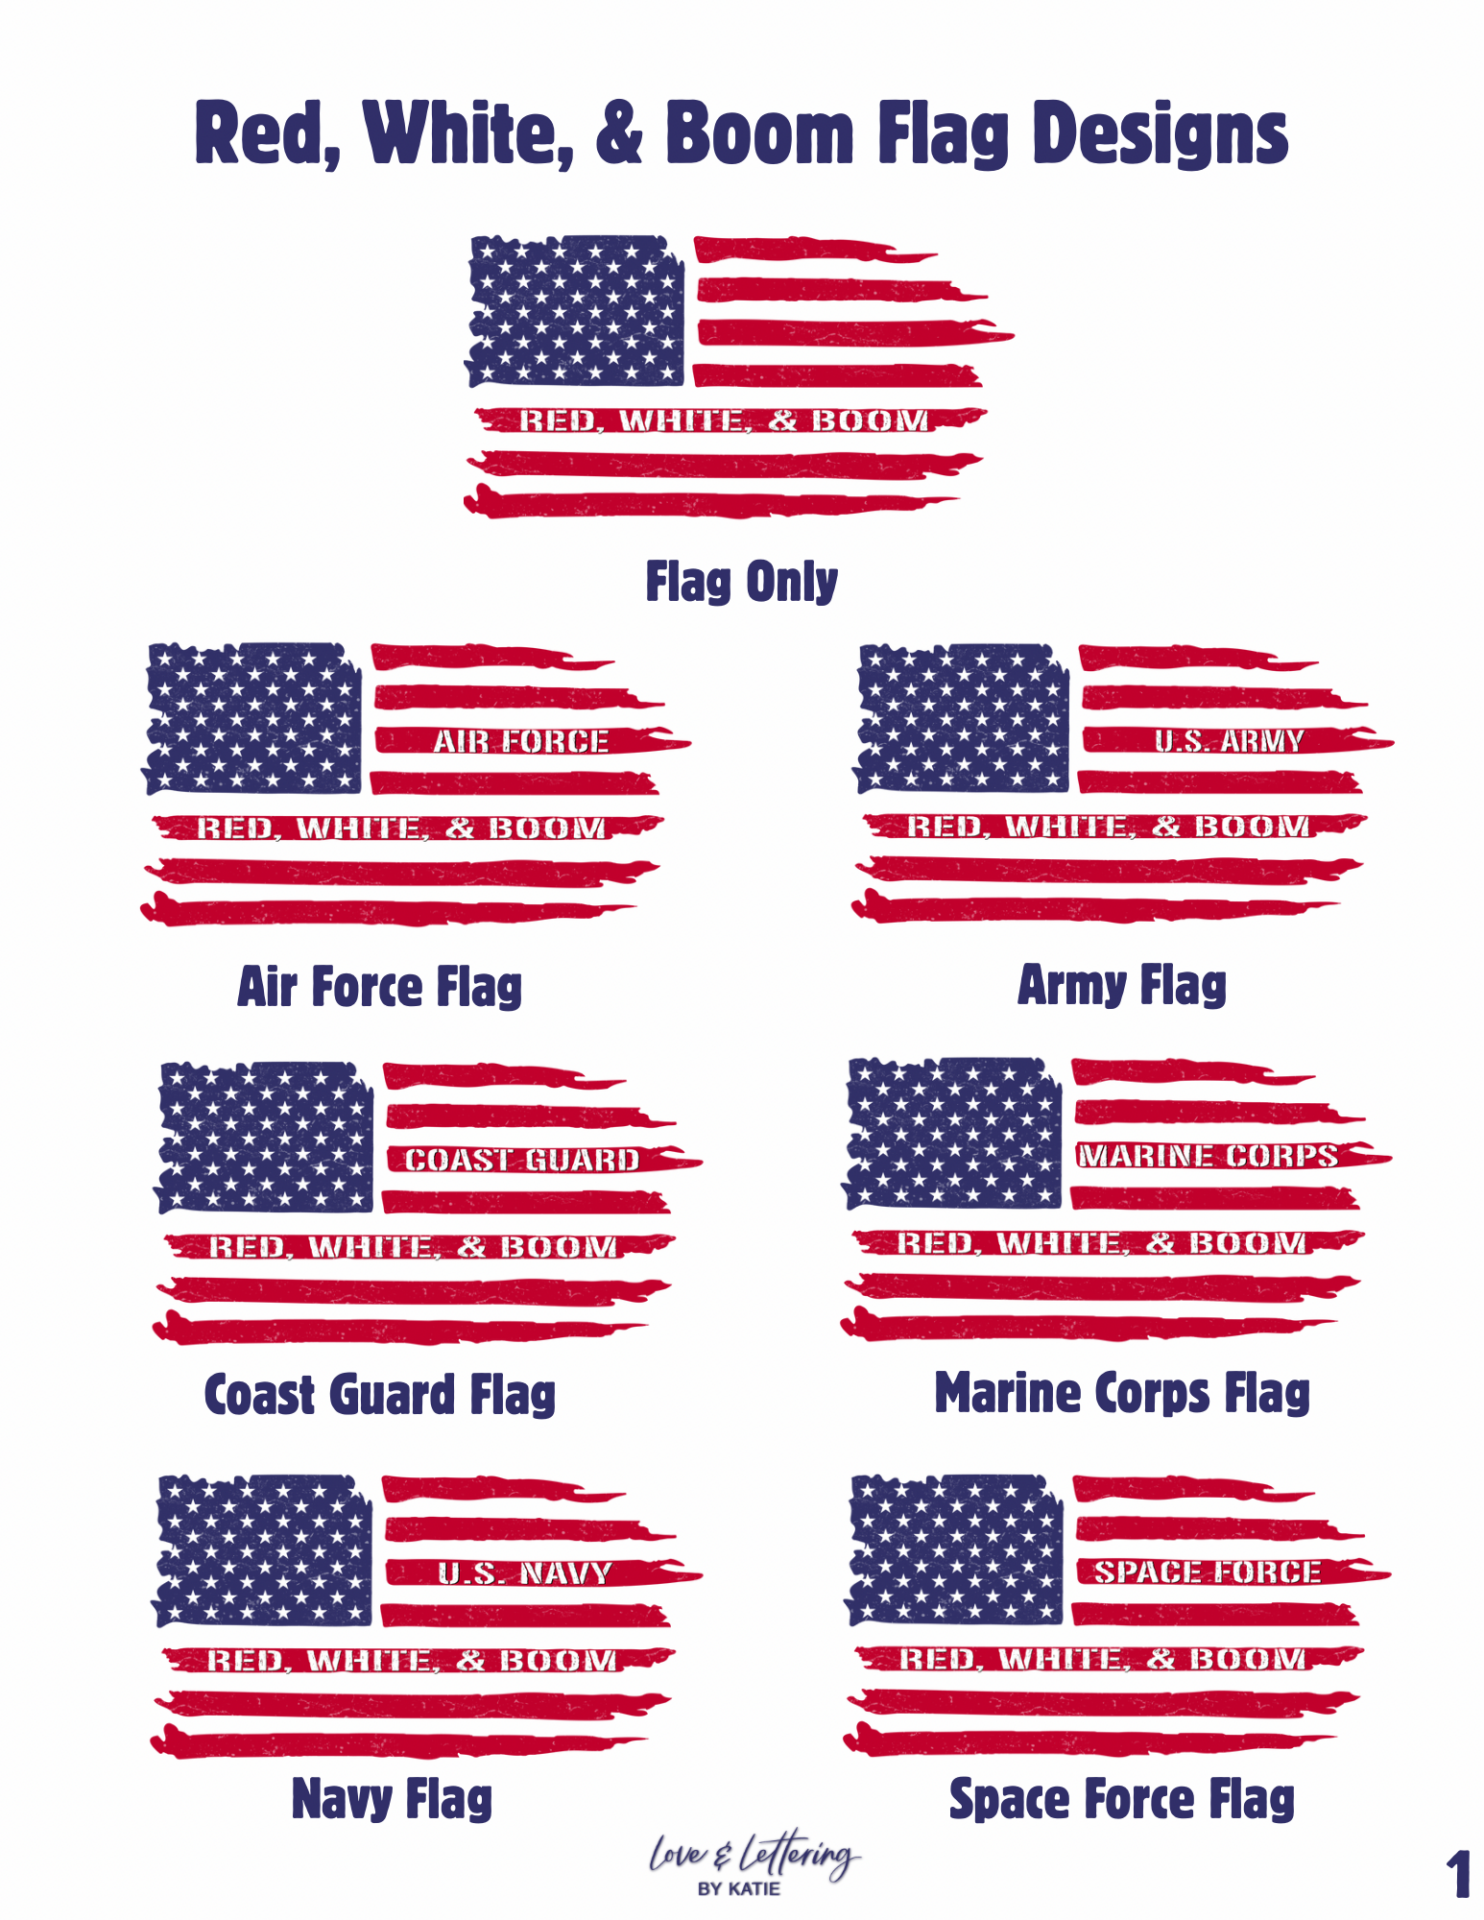 Red, White, & Boom T-Shirt Flag Designs - Flag Only and Military Branch Specific